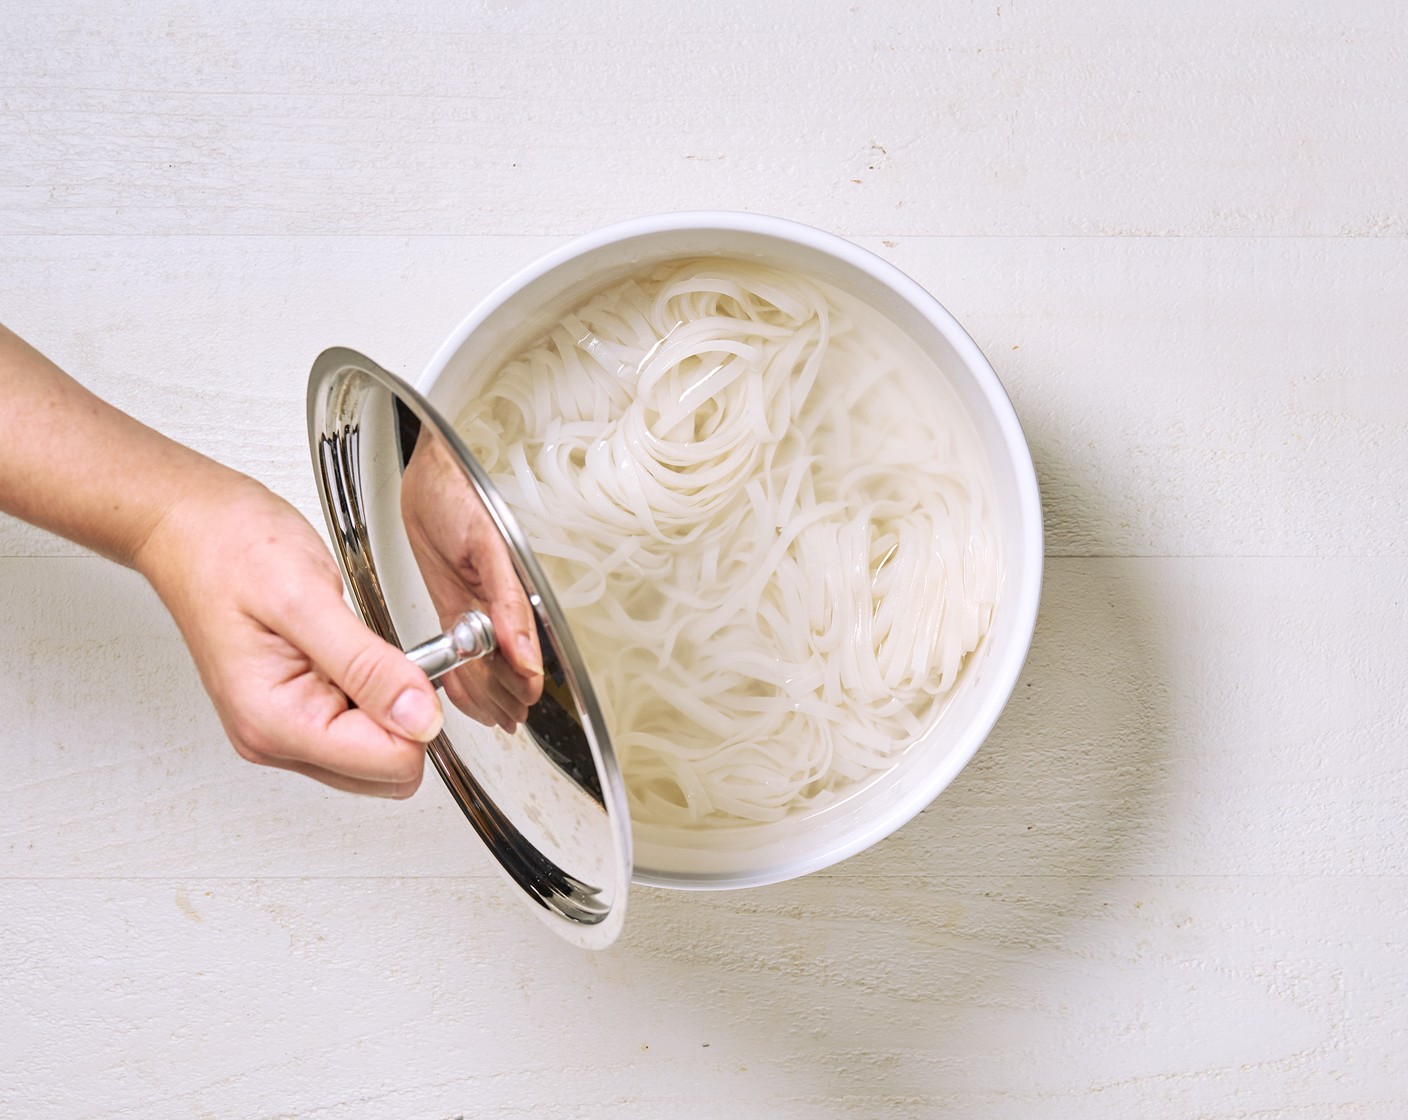 step 1 Bring a large pot of water to a boil. Place the Rice Noodles (1 pckg) in a large heat-safe bowl. Carefully pour the boiling water overtop. Cover and let it sit for 5-10 minutes.